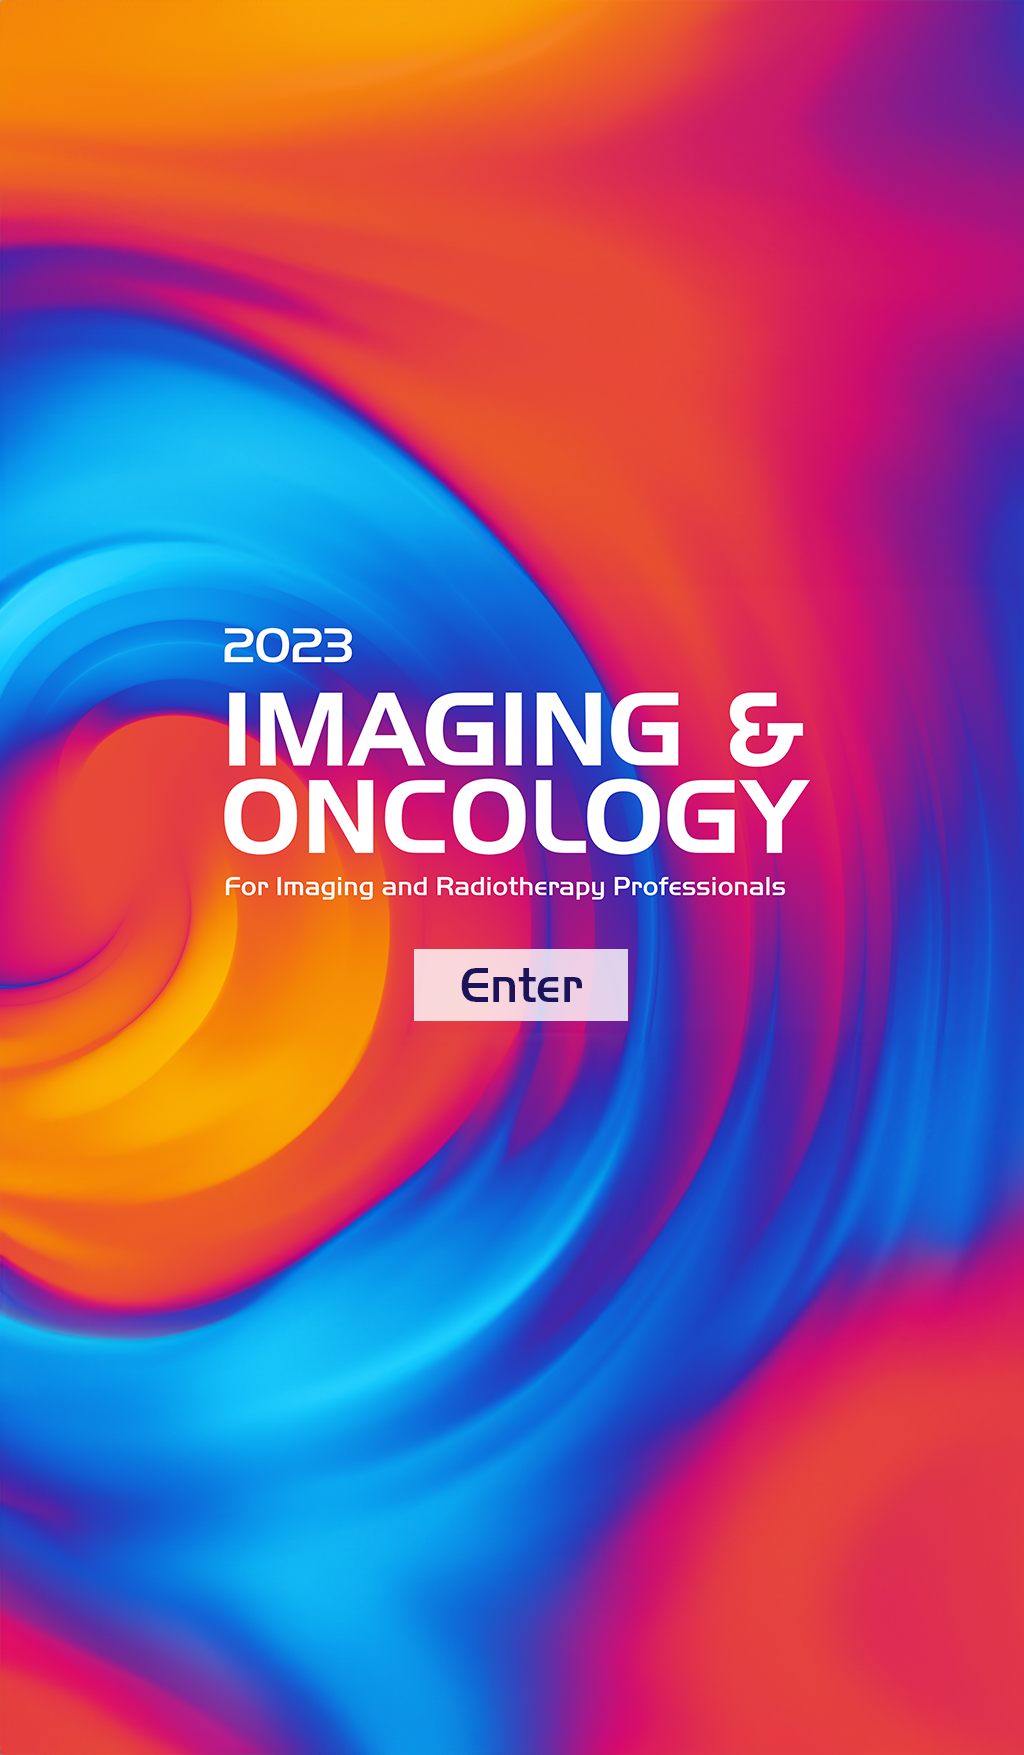 Imaging & Oncology 2023